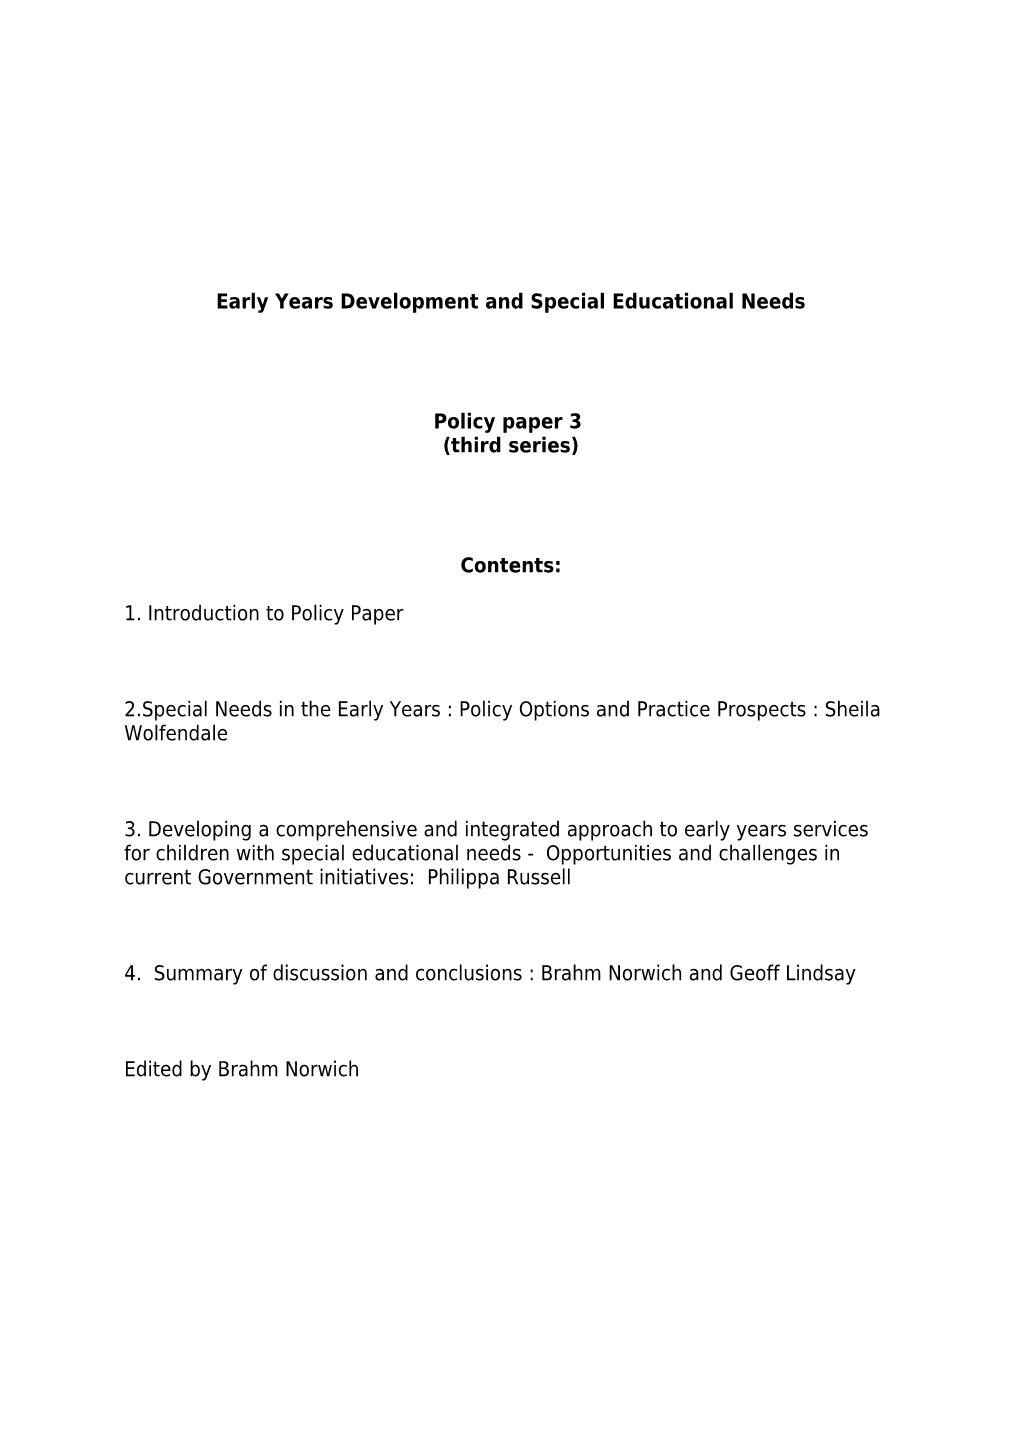 Early Years Development and Special Educational Needs